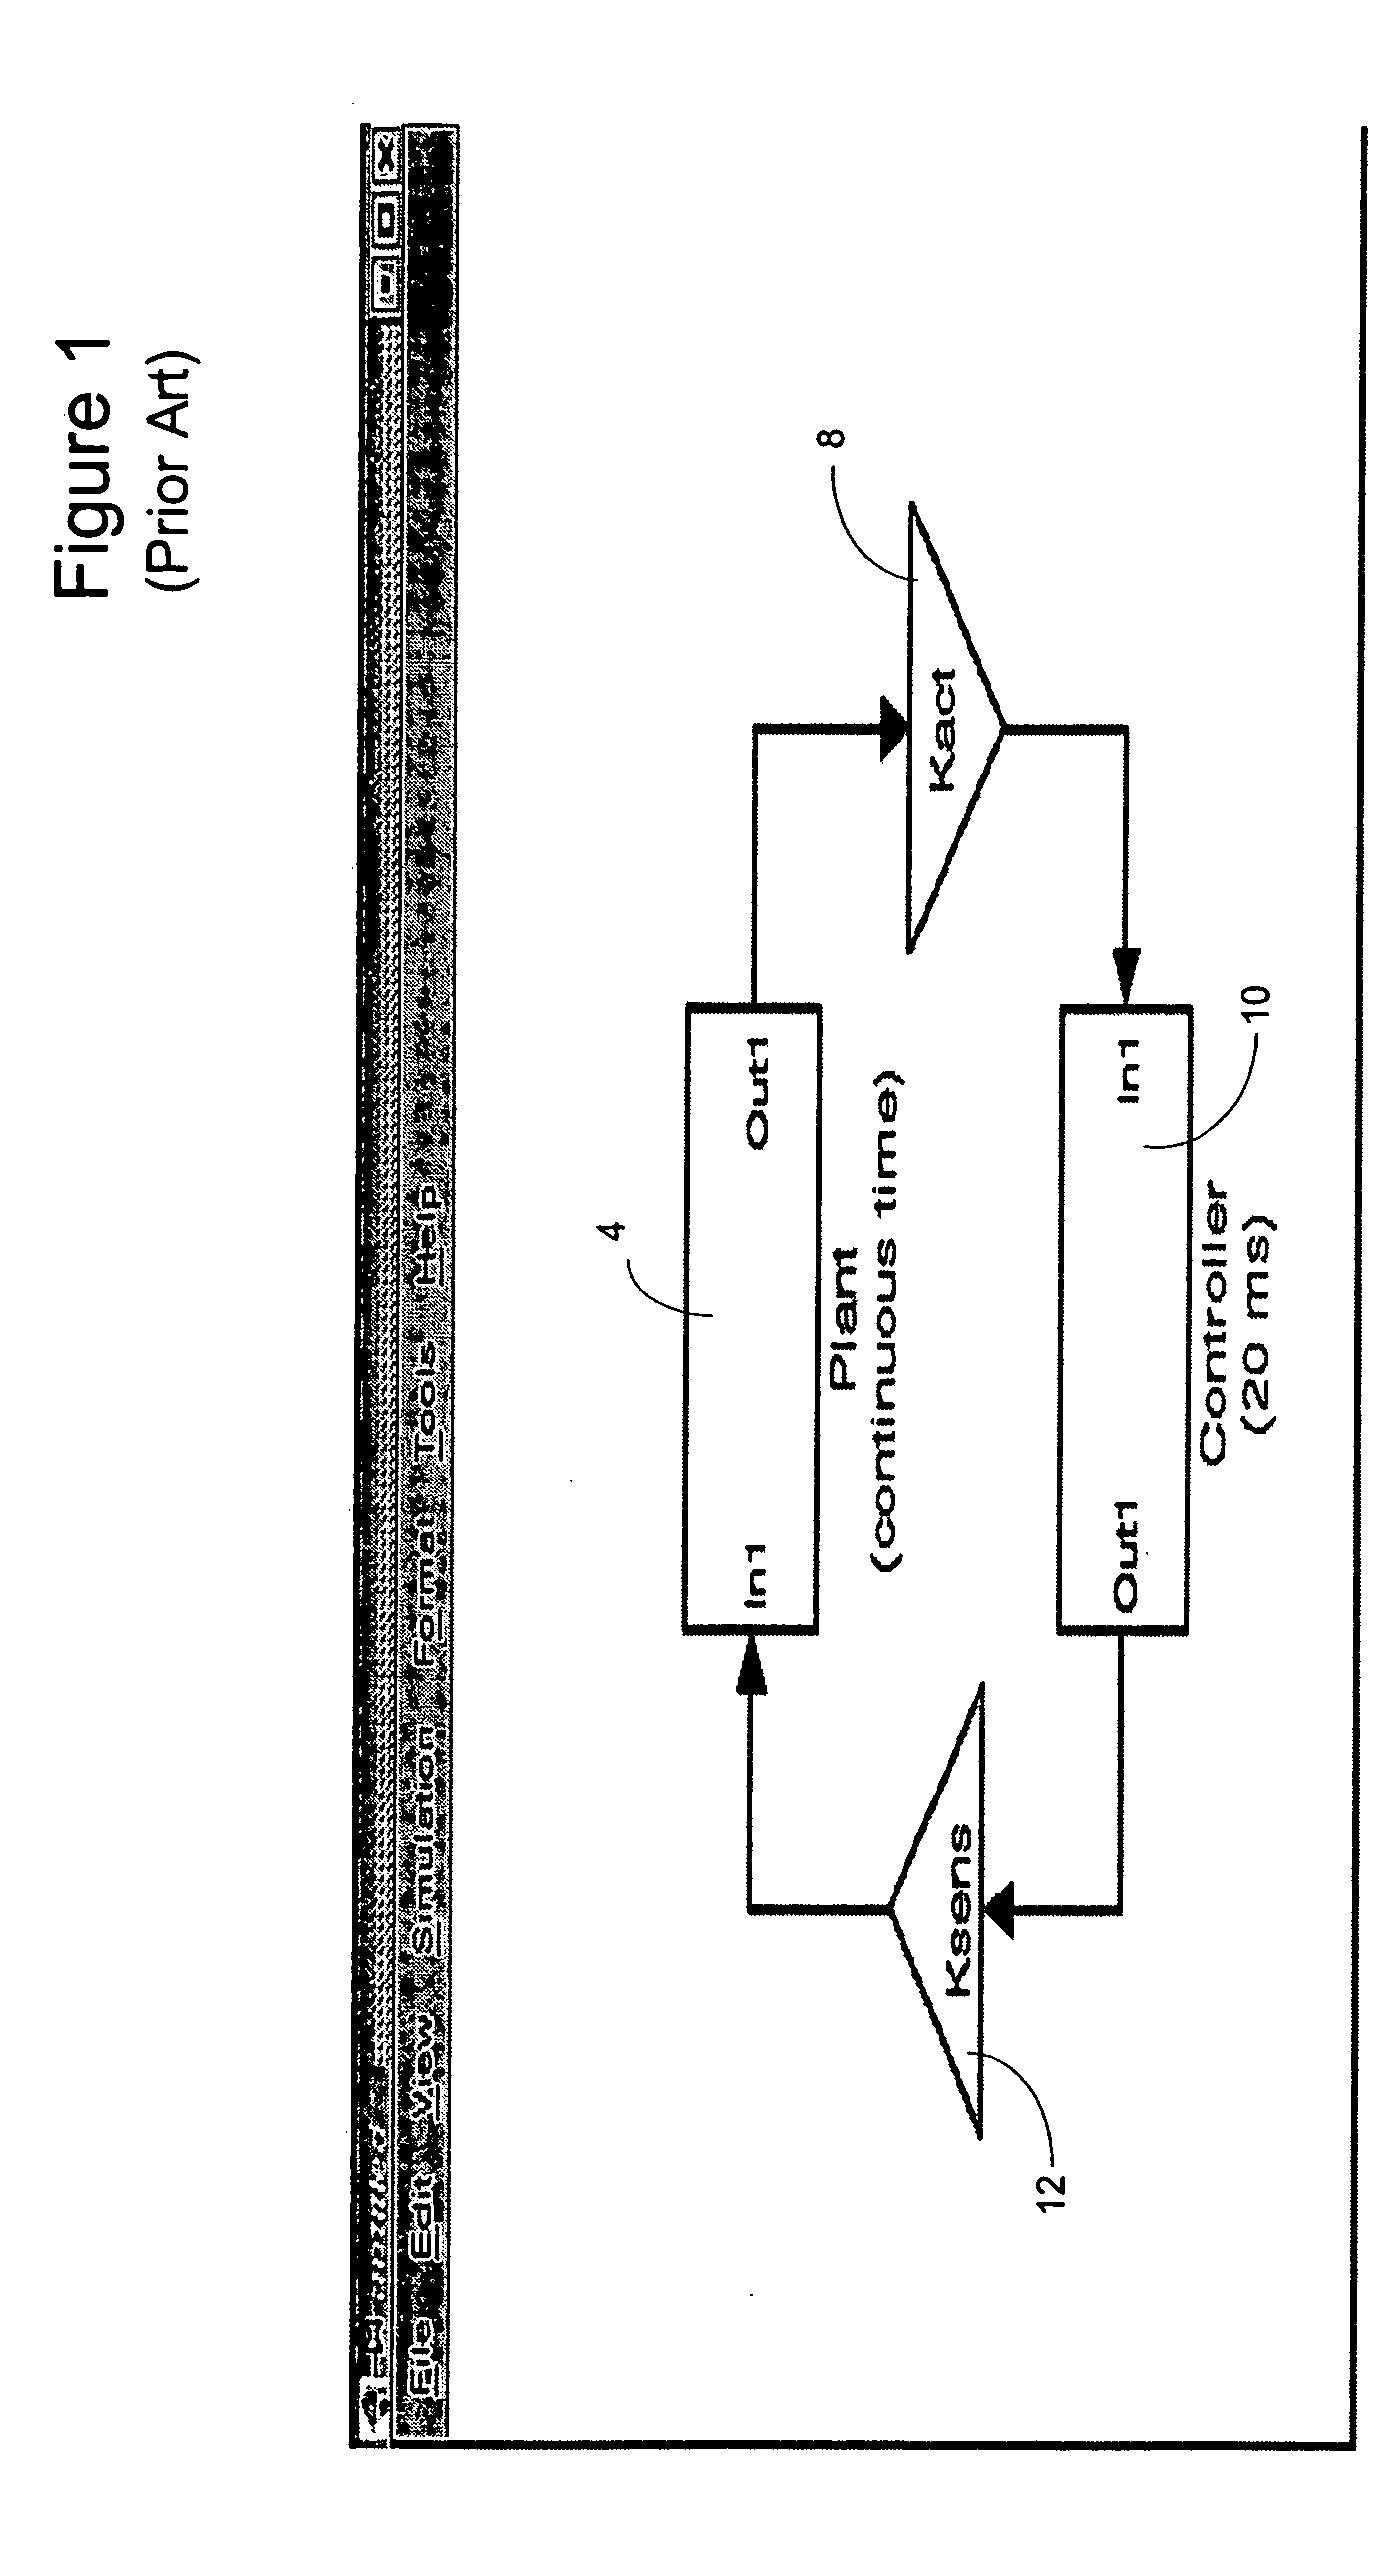 System and method for scheduling the execution of model components using model events